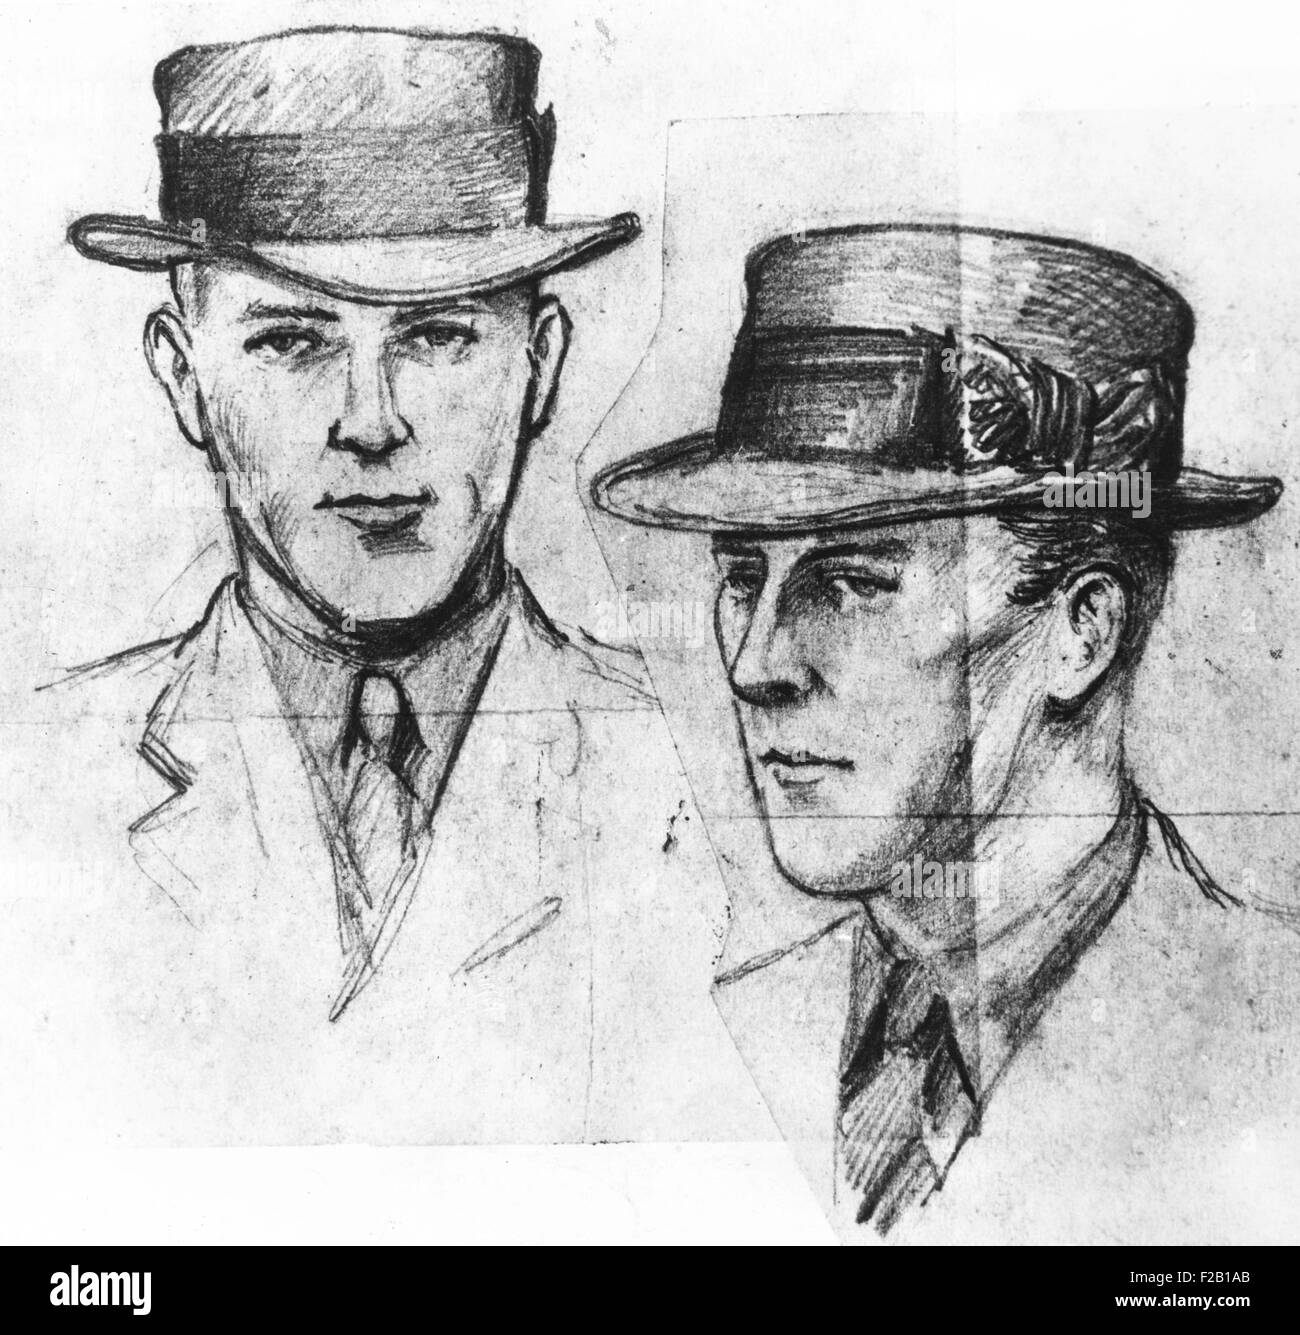 'The resemblance to Bruno Hauptmann is self-evident', read the Sept. 1934 ACME Newspictures' caption. Artist's likeness of the Lindbergh baby kidnapper, was drawn from a verbal description by J. F. 'Jafsie' Condon. Condon saw the man to whom he gave the ransom for the Lindbergh baby in March 1932. In 1934, Johnson was reluctant to identify Bruno Hauptmann as the man he saw in 1932. (CSU 2015 7 446) Stock Photo